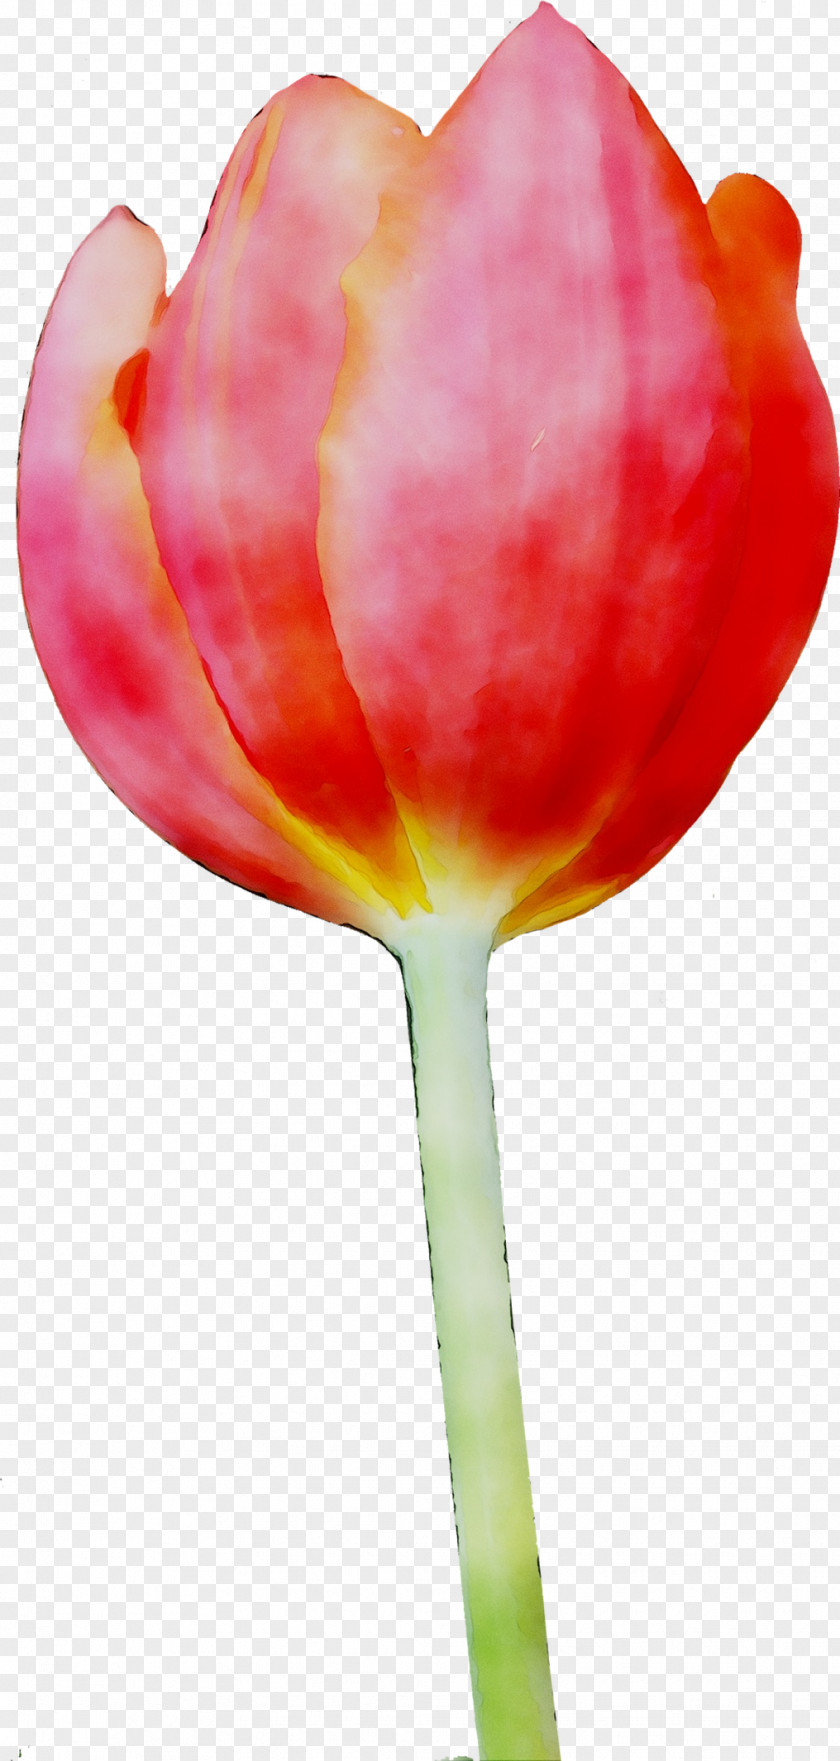 Tulip Clip Art Image Transparency PNG